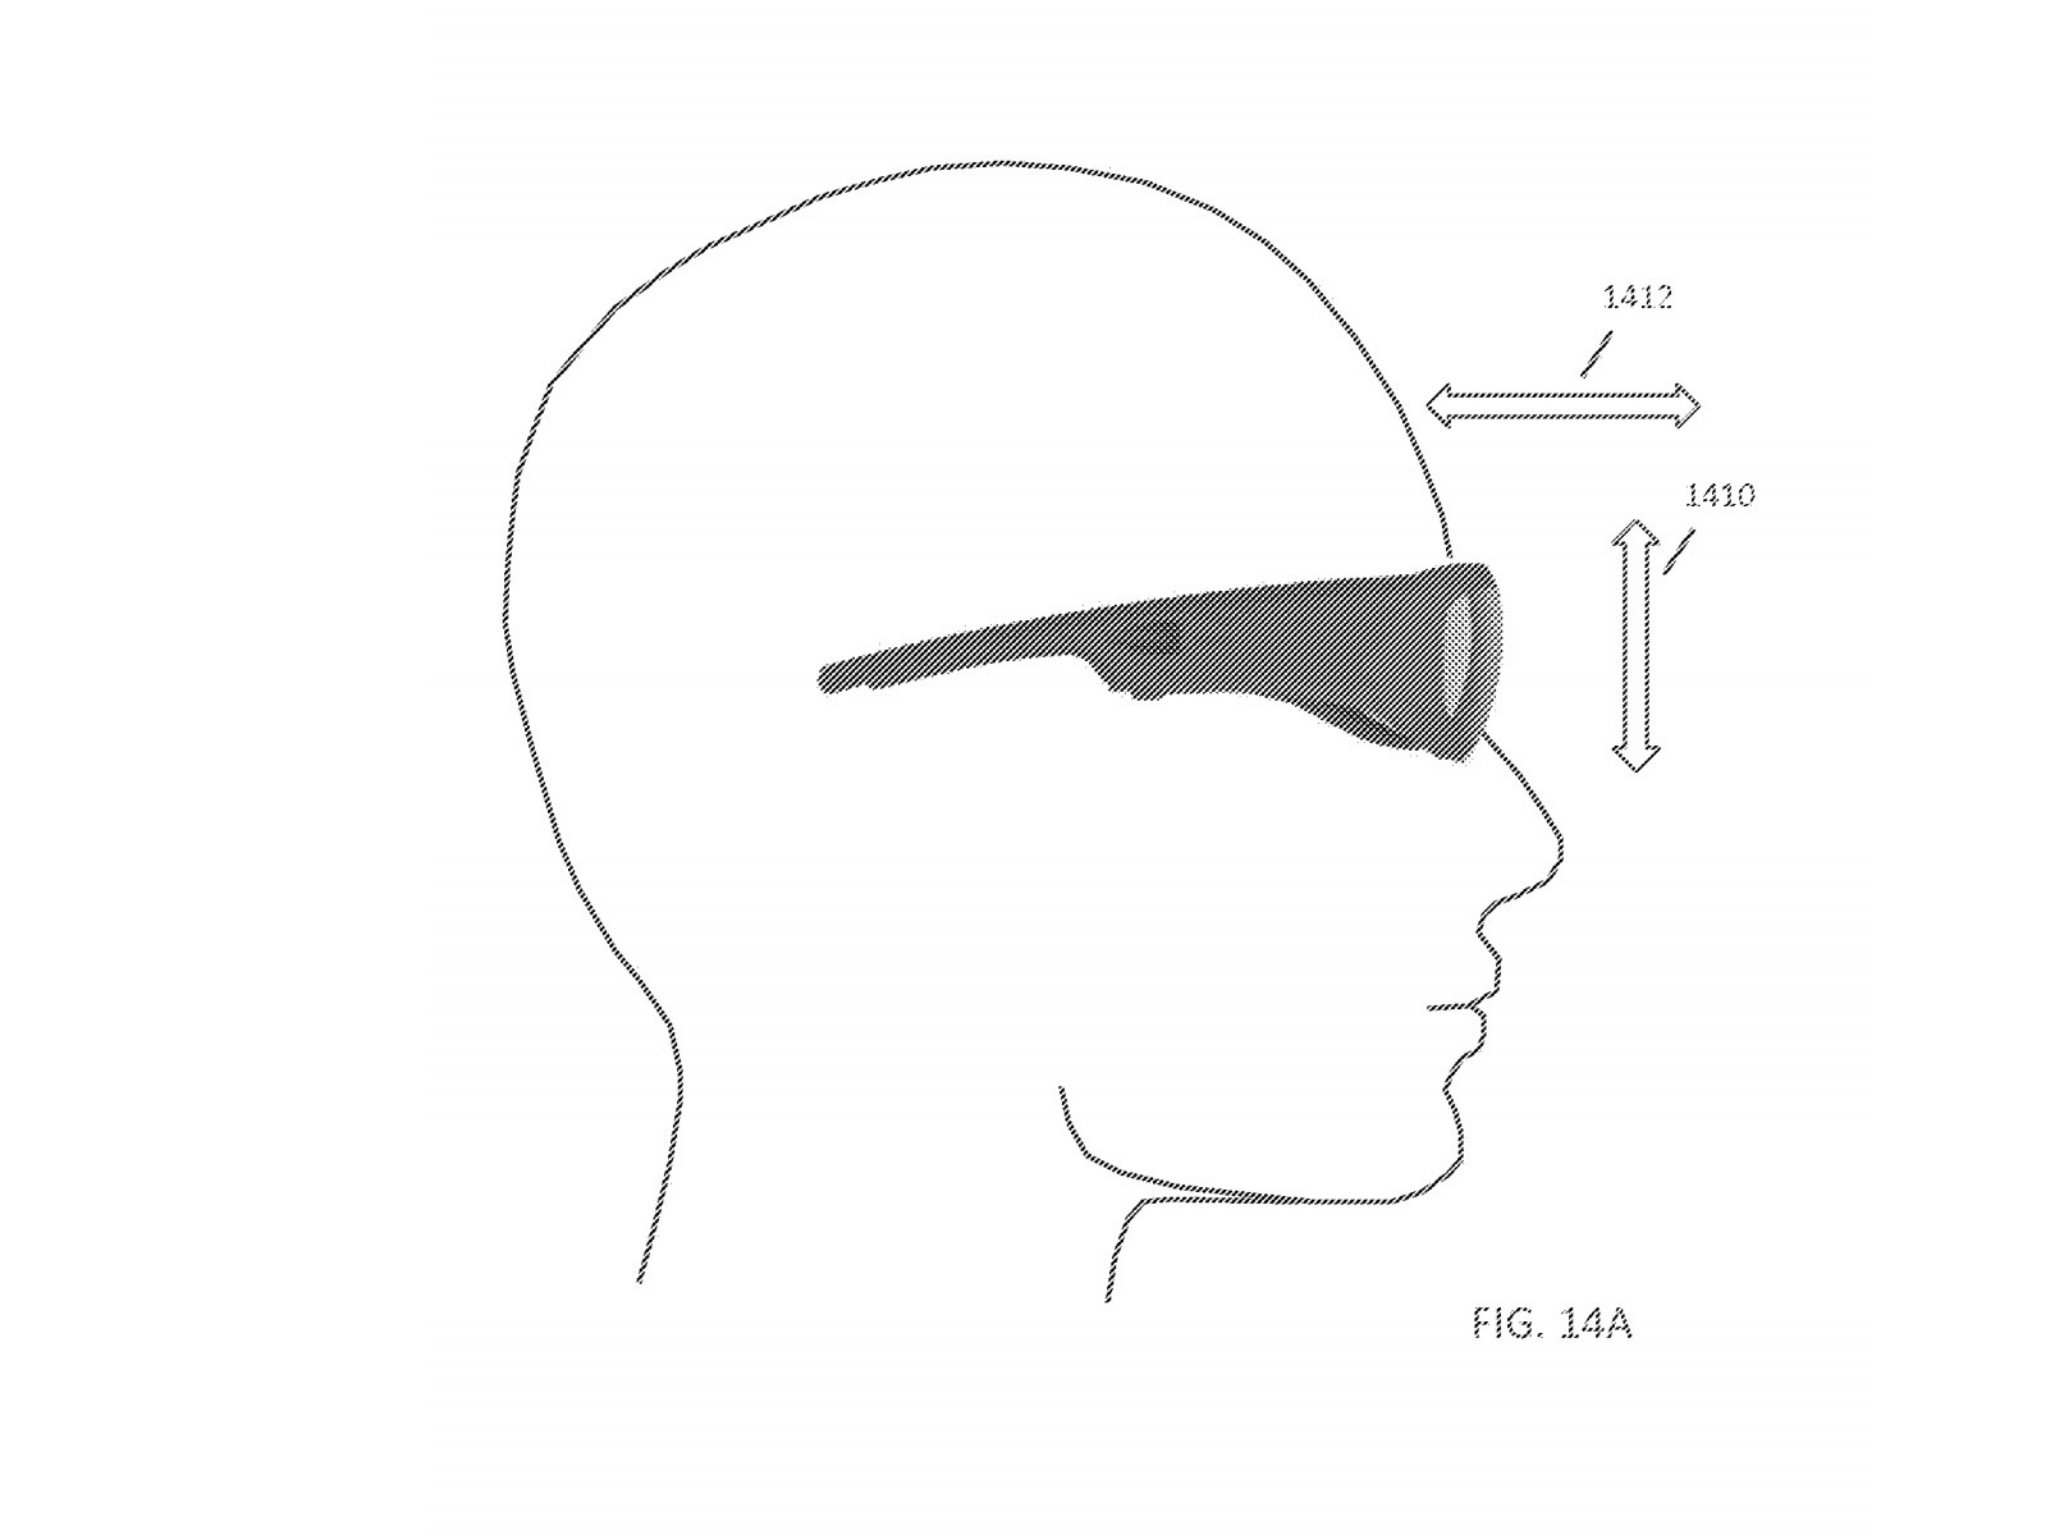 New Microsoft patent shows off augmented reality glasses